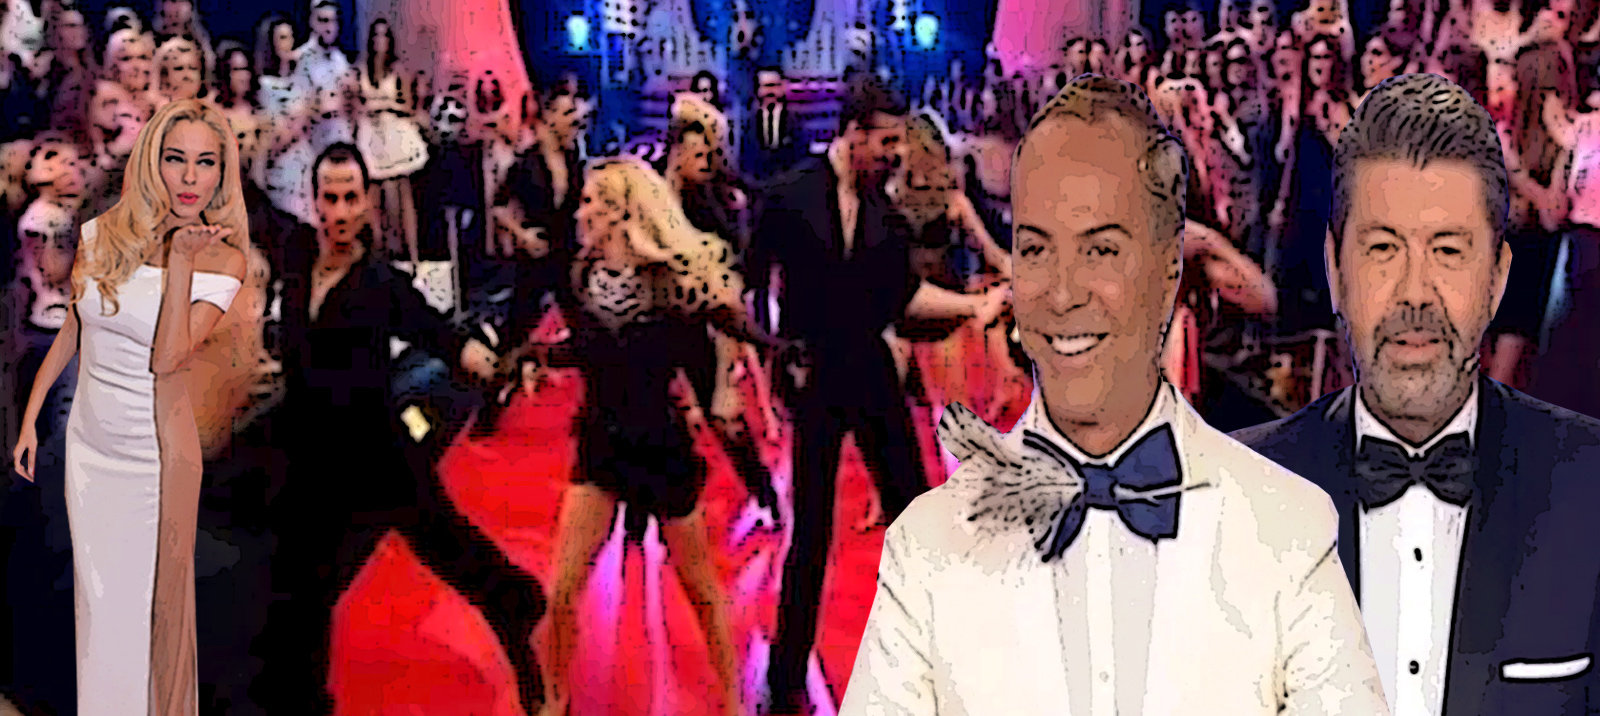 Dancing With The Stars  5: Μια κιτς υπερπαραγωγή σε βαθύ γήρας…